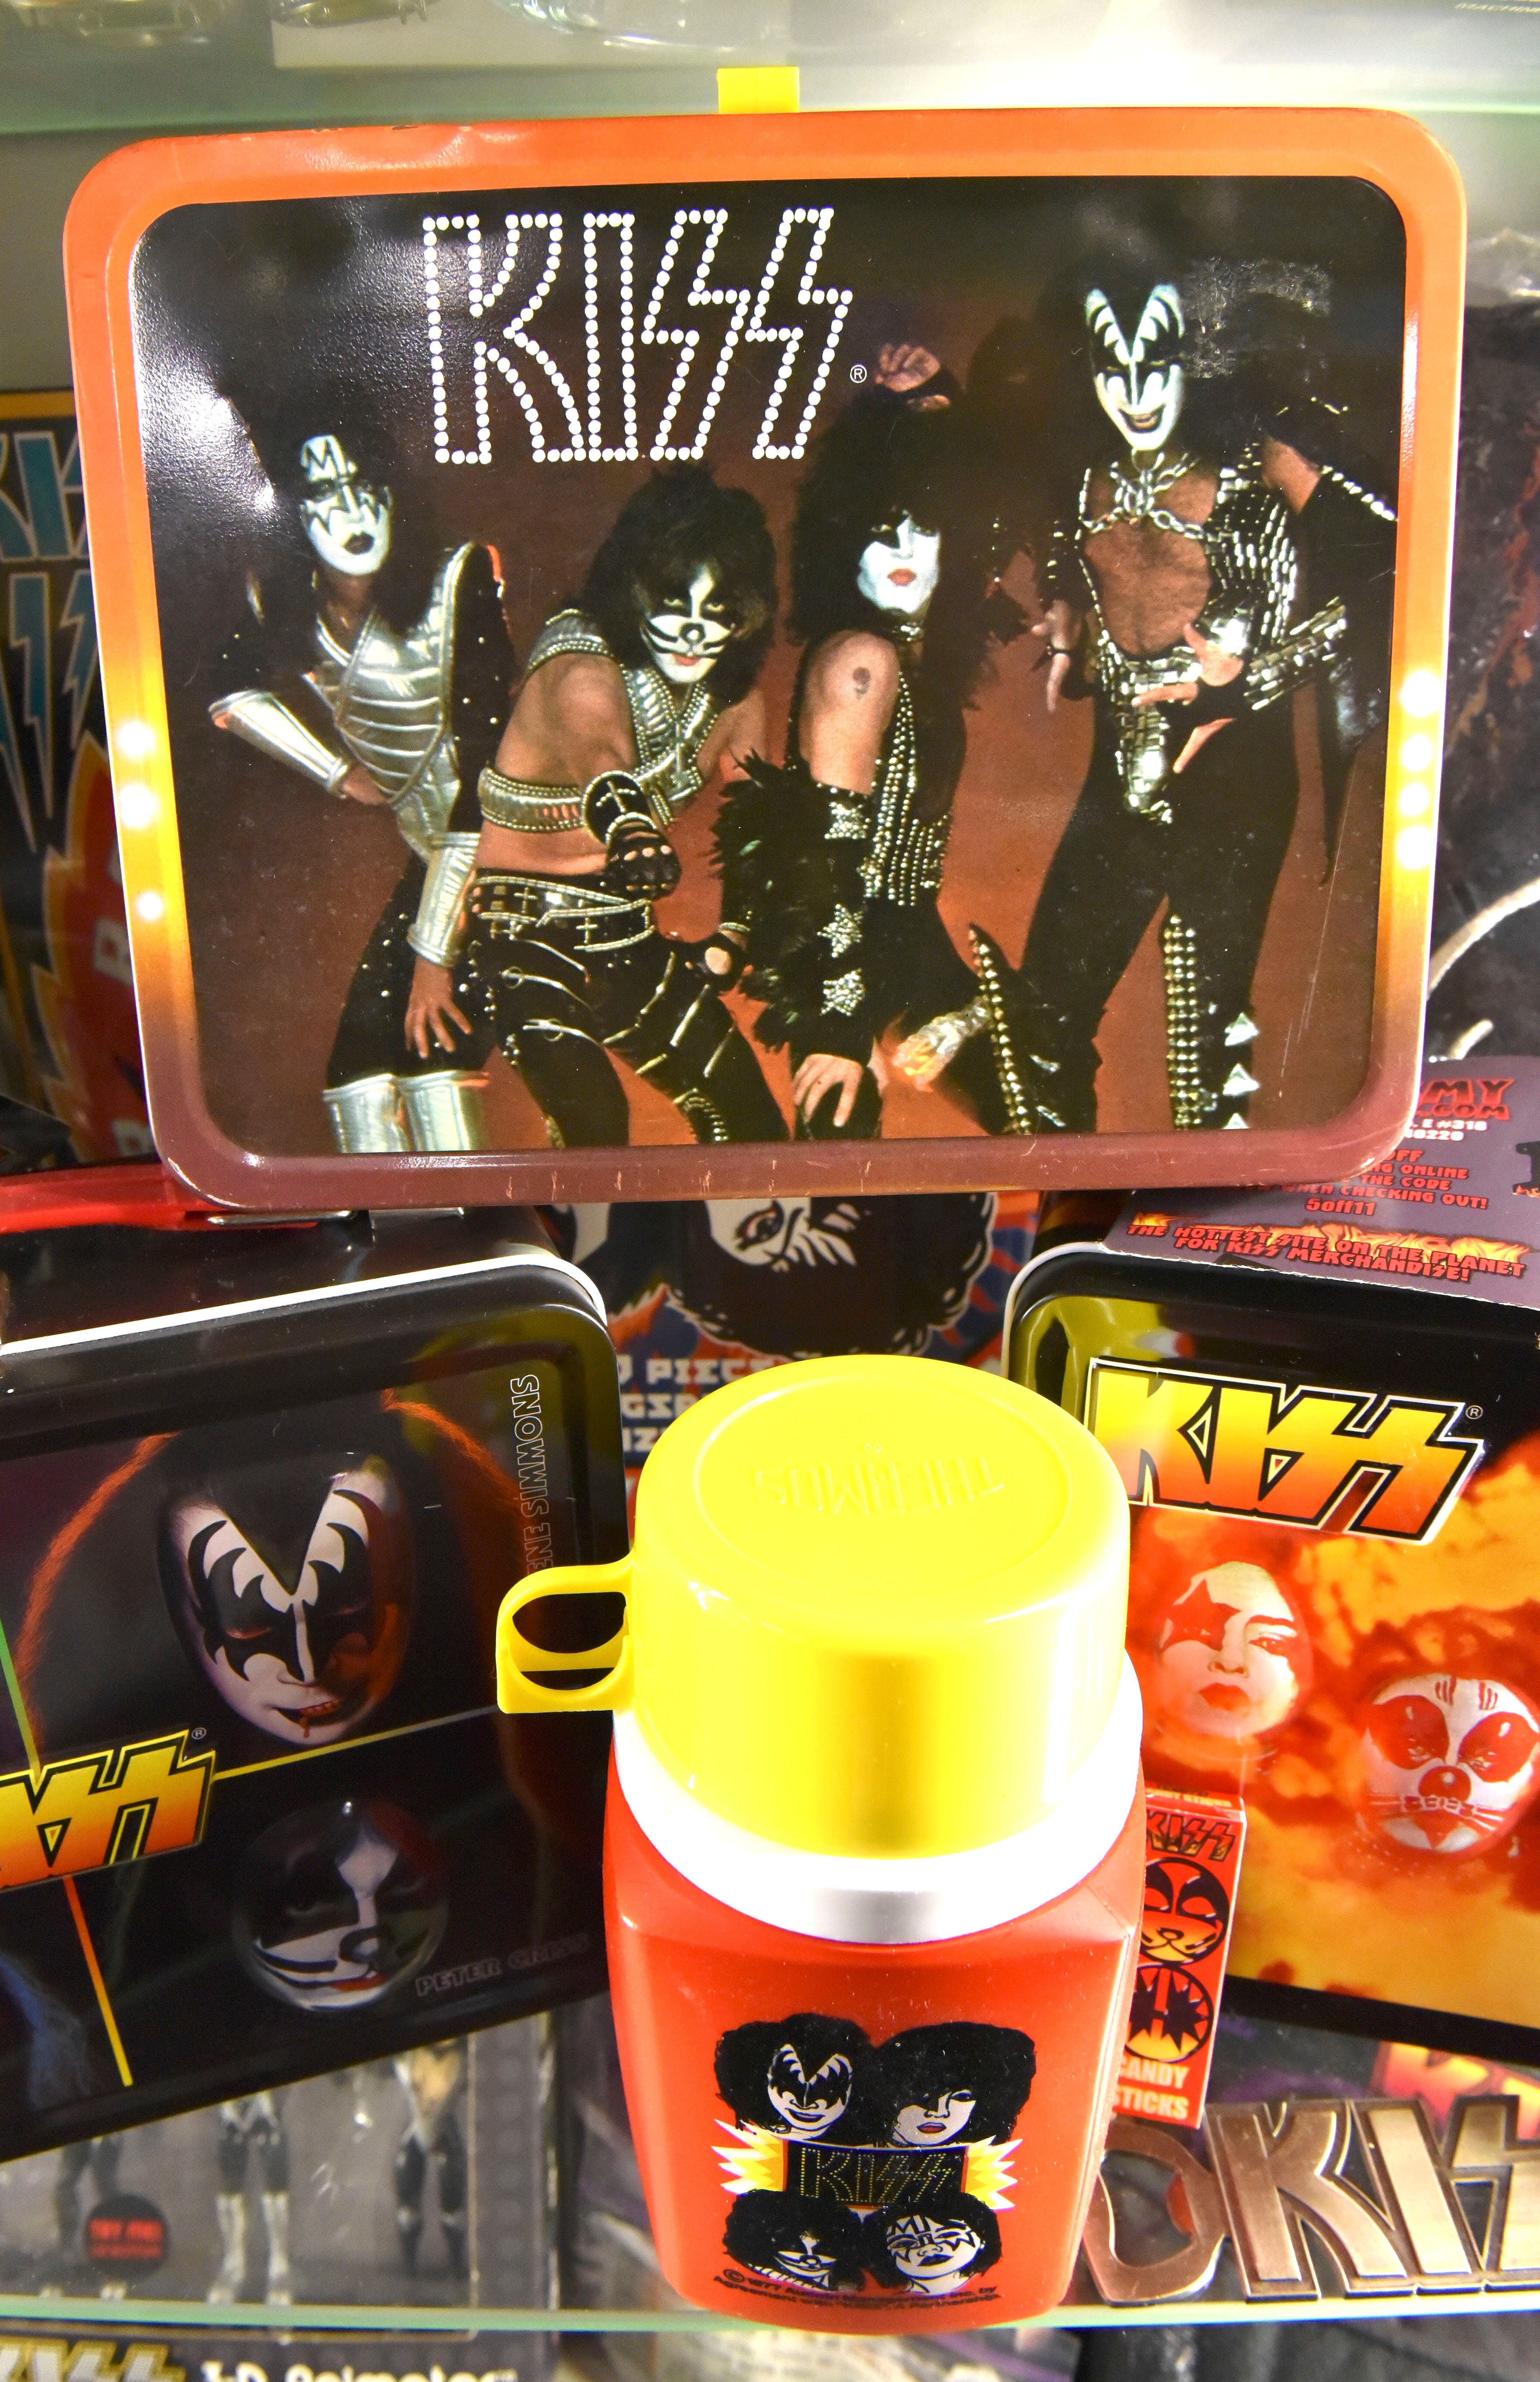 This is an original KISS lunch box with a thermos from the early 1970s.